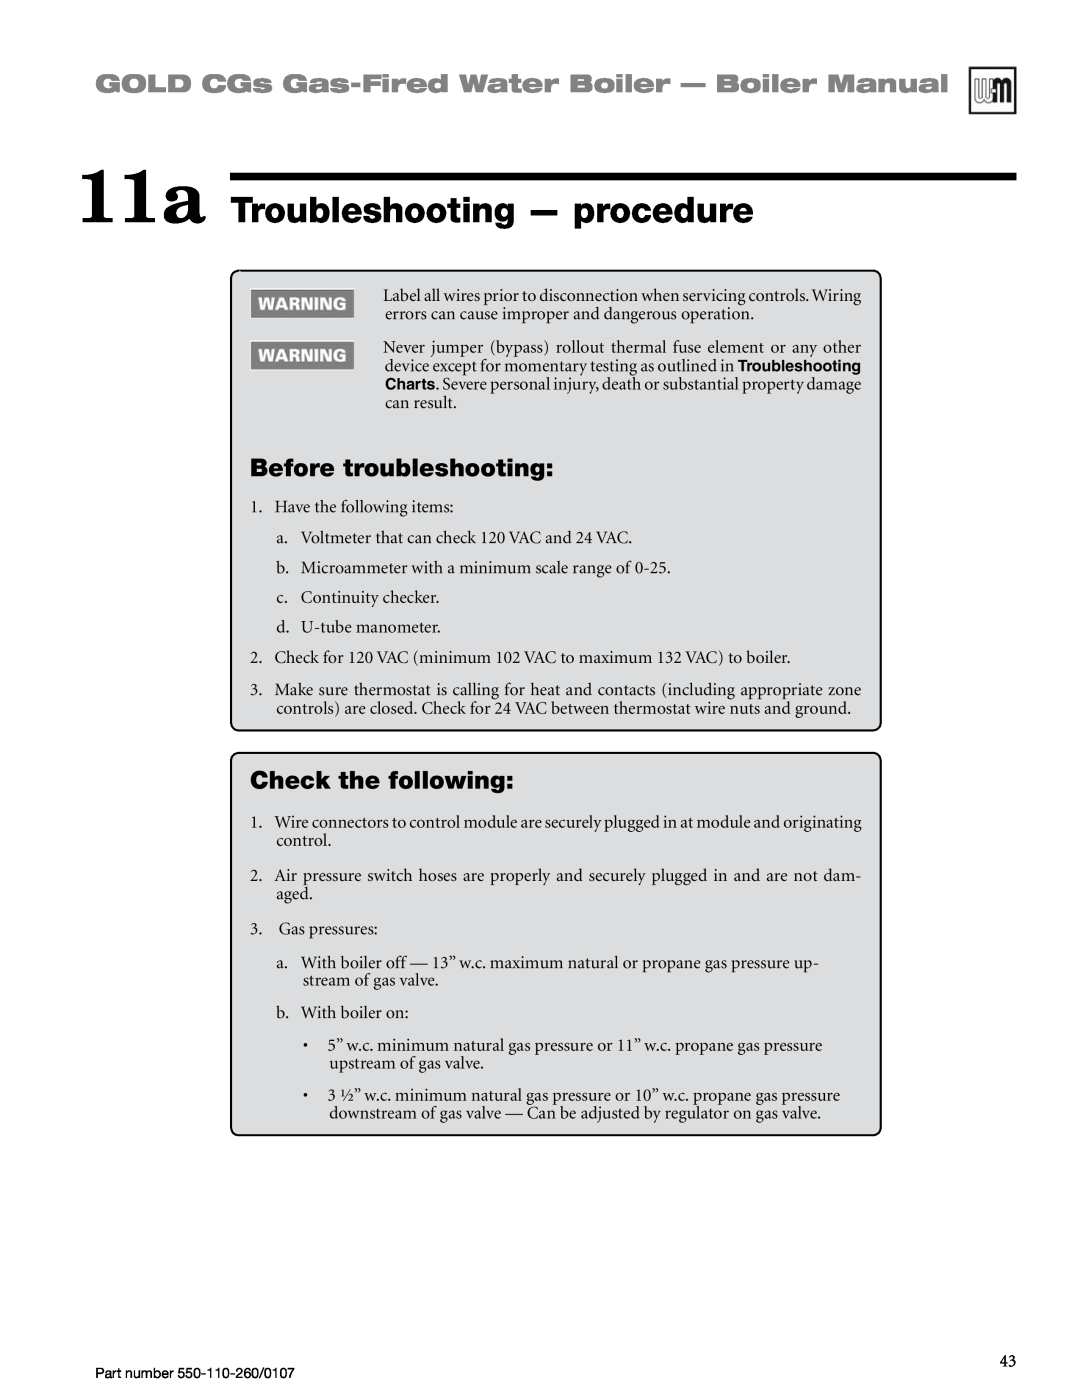 Weil-McLain 550-110-260/0107 manual 11a Troubleshooting — procedure, Before troubleshooting, Check the following 